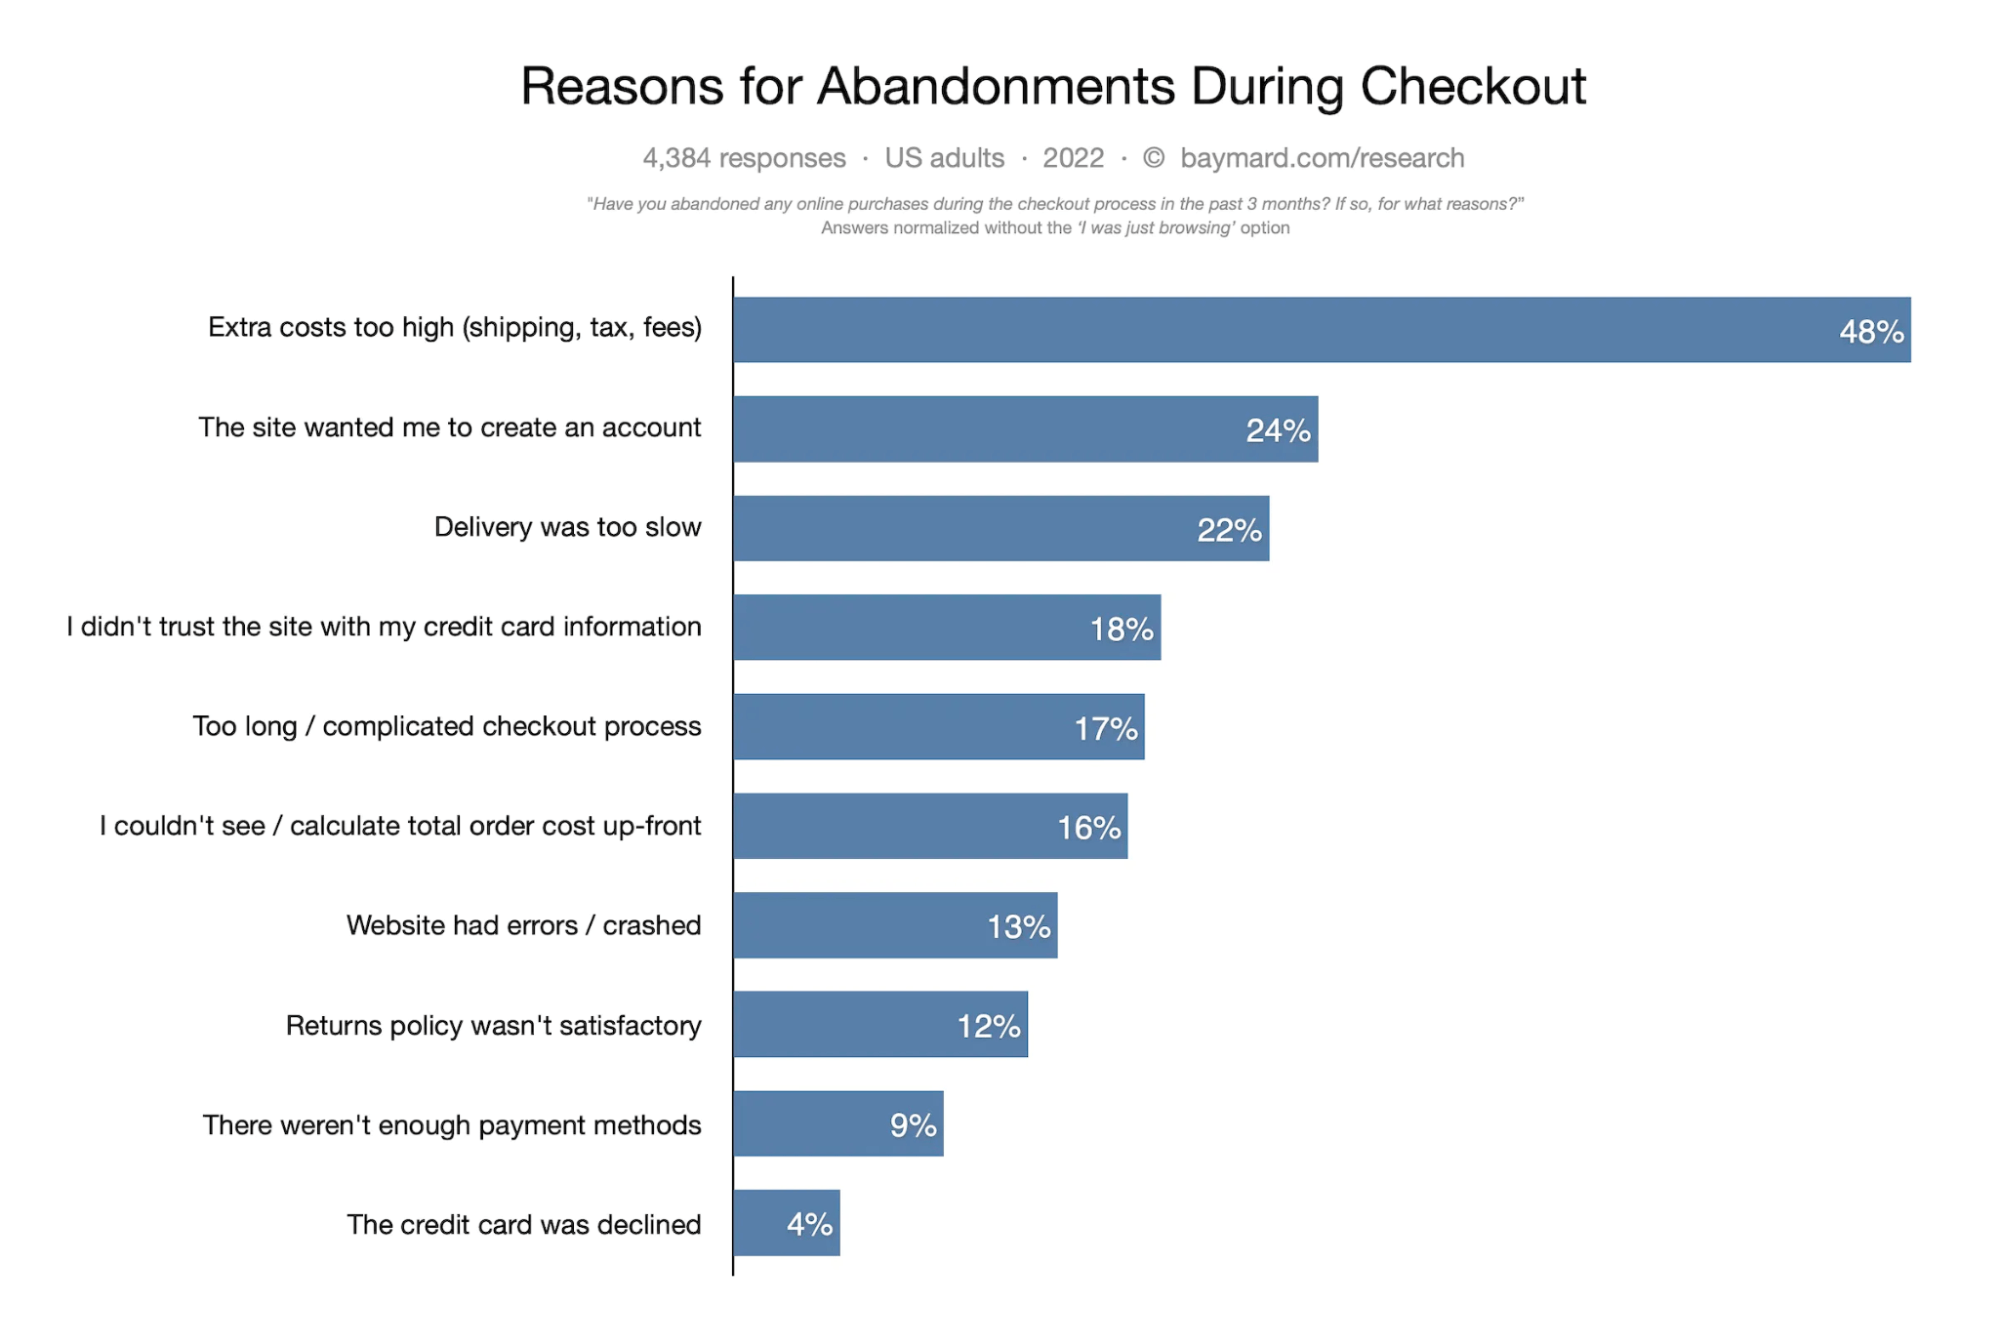 Reasons for abondonments during checkout data